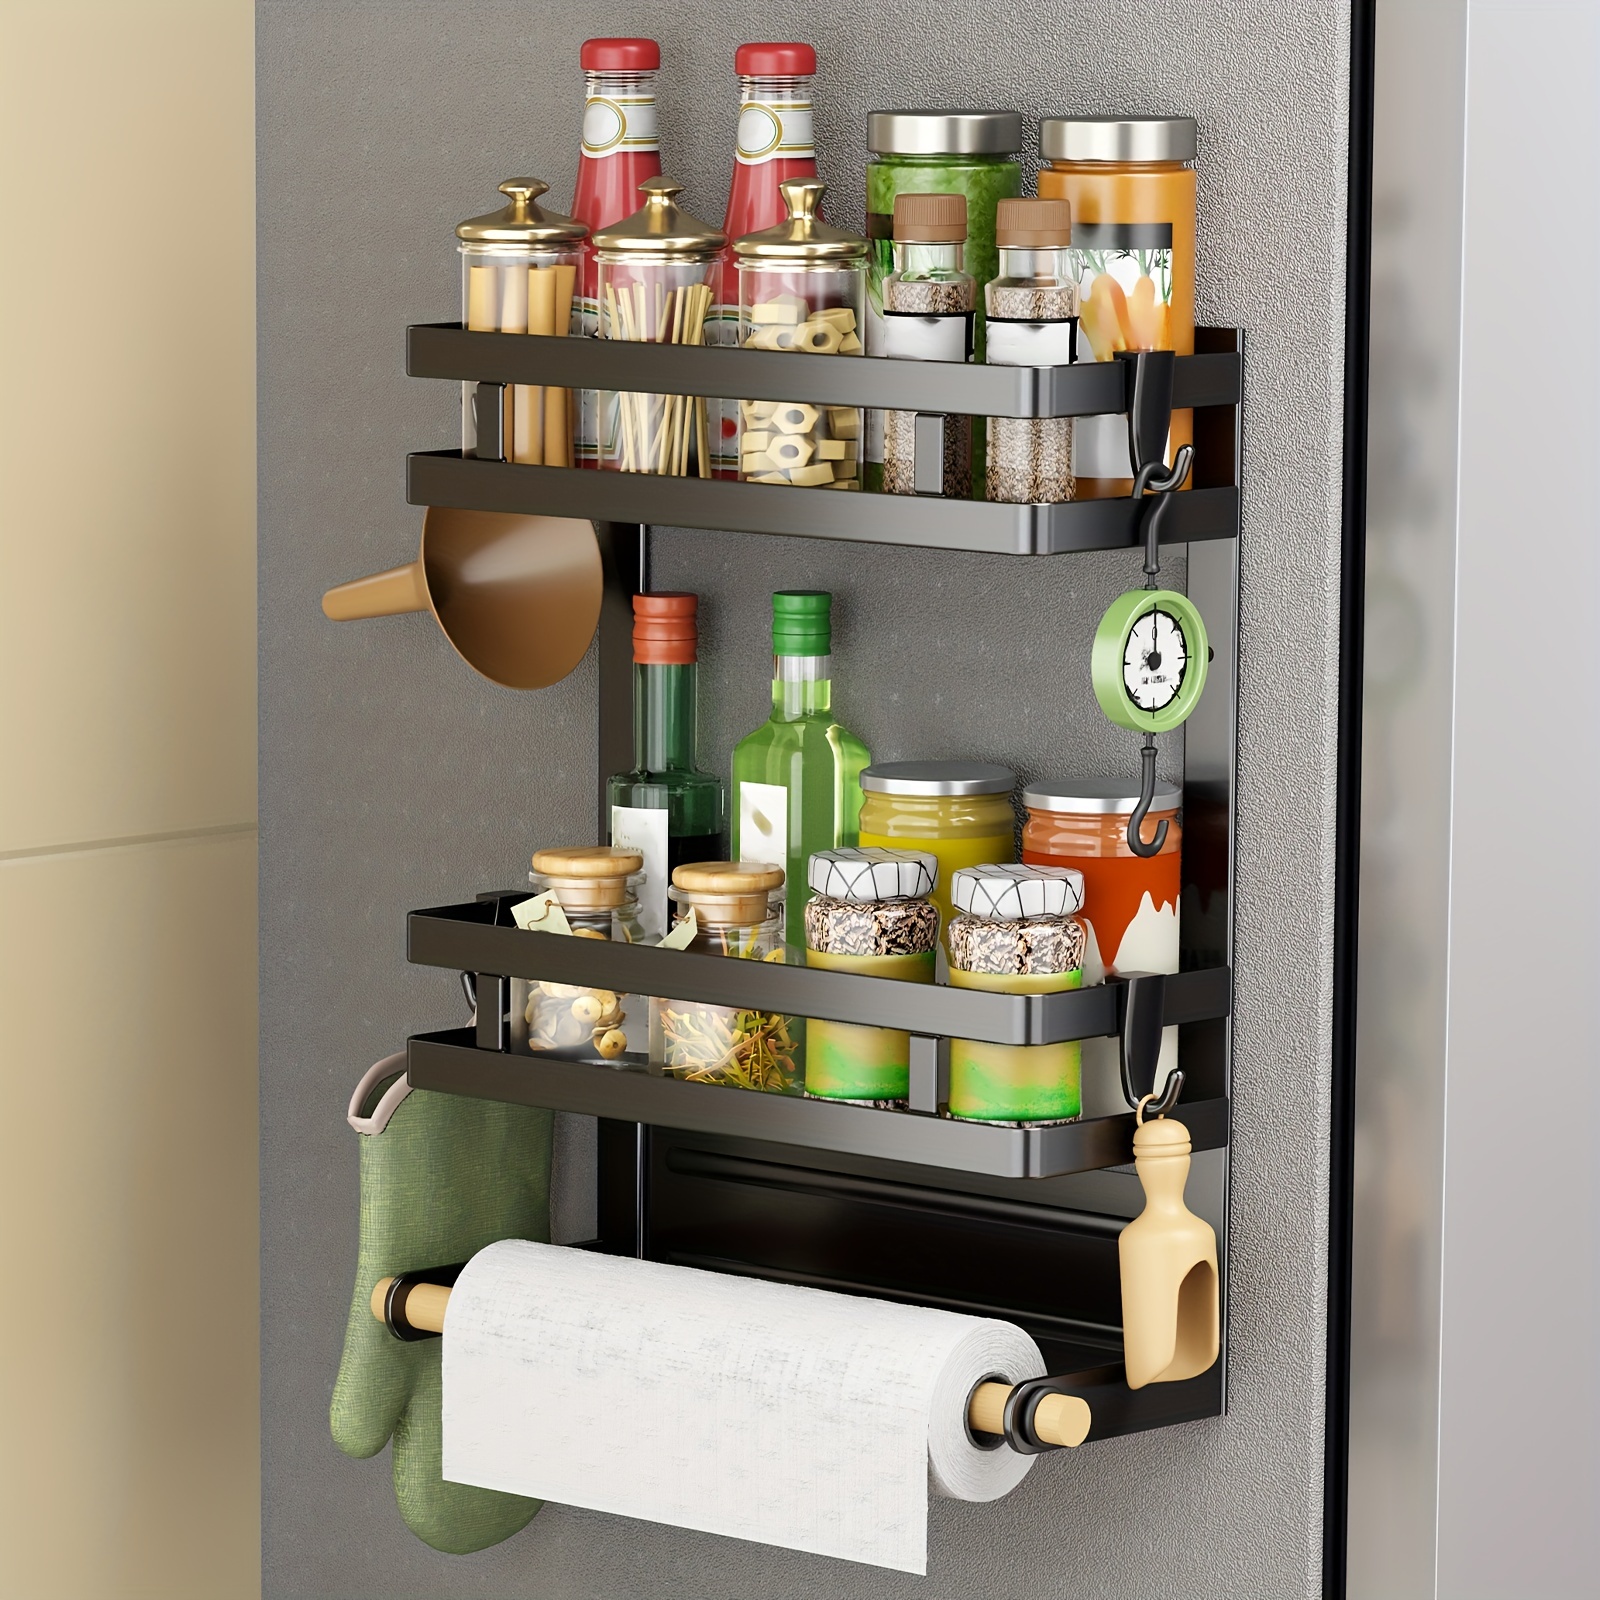 ALPHYSE Magnetic Spice Rack for Refrigerator, 11.8 inch Adhesive Wall Mount Spice Rack, Strong Magnetic Shelf for Refrigerator, Space Saving Kitchen